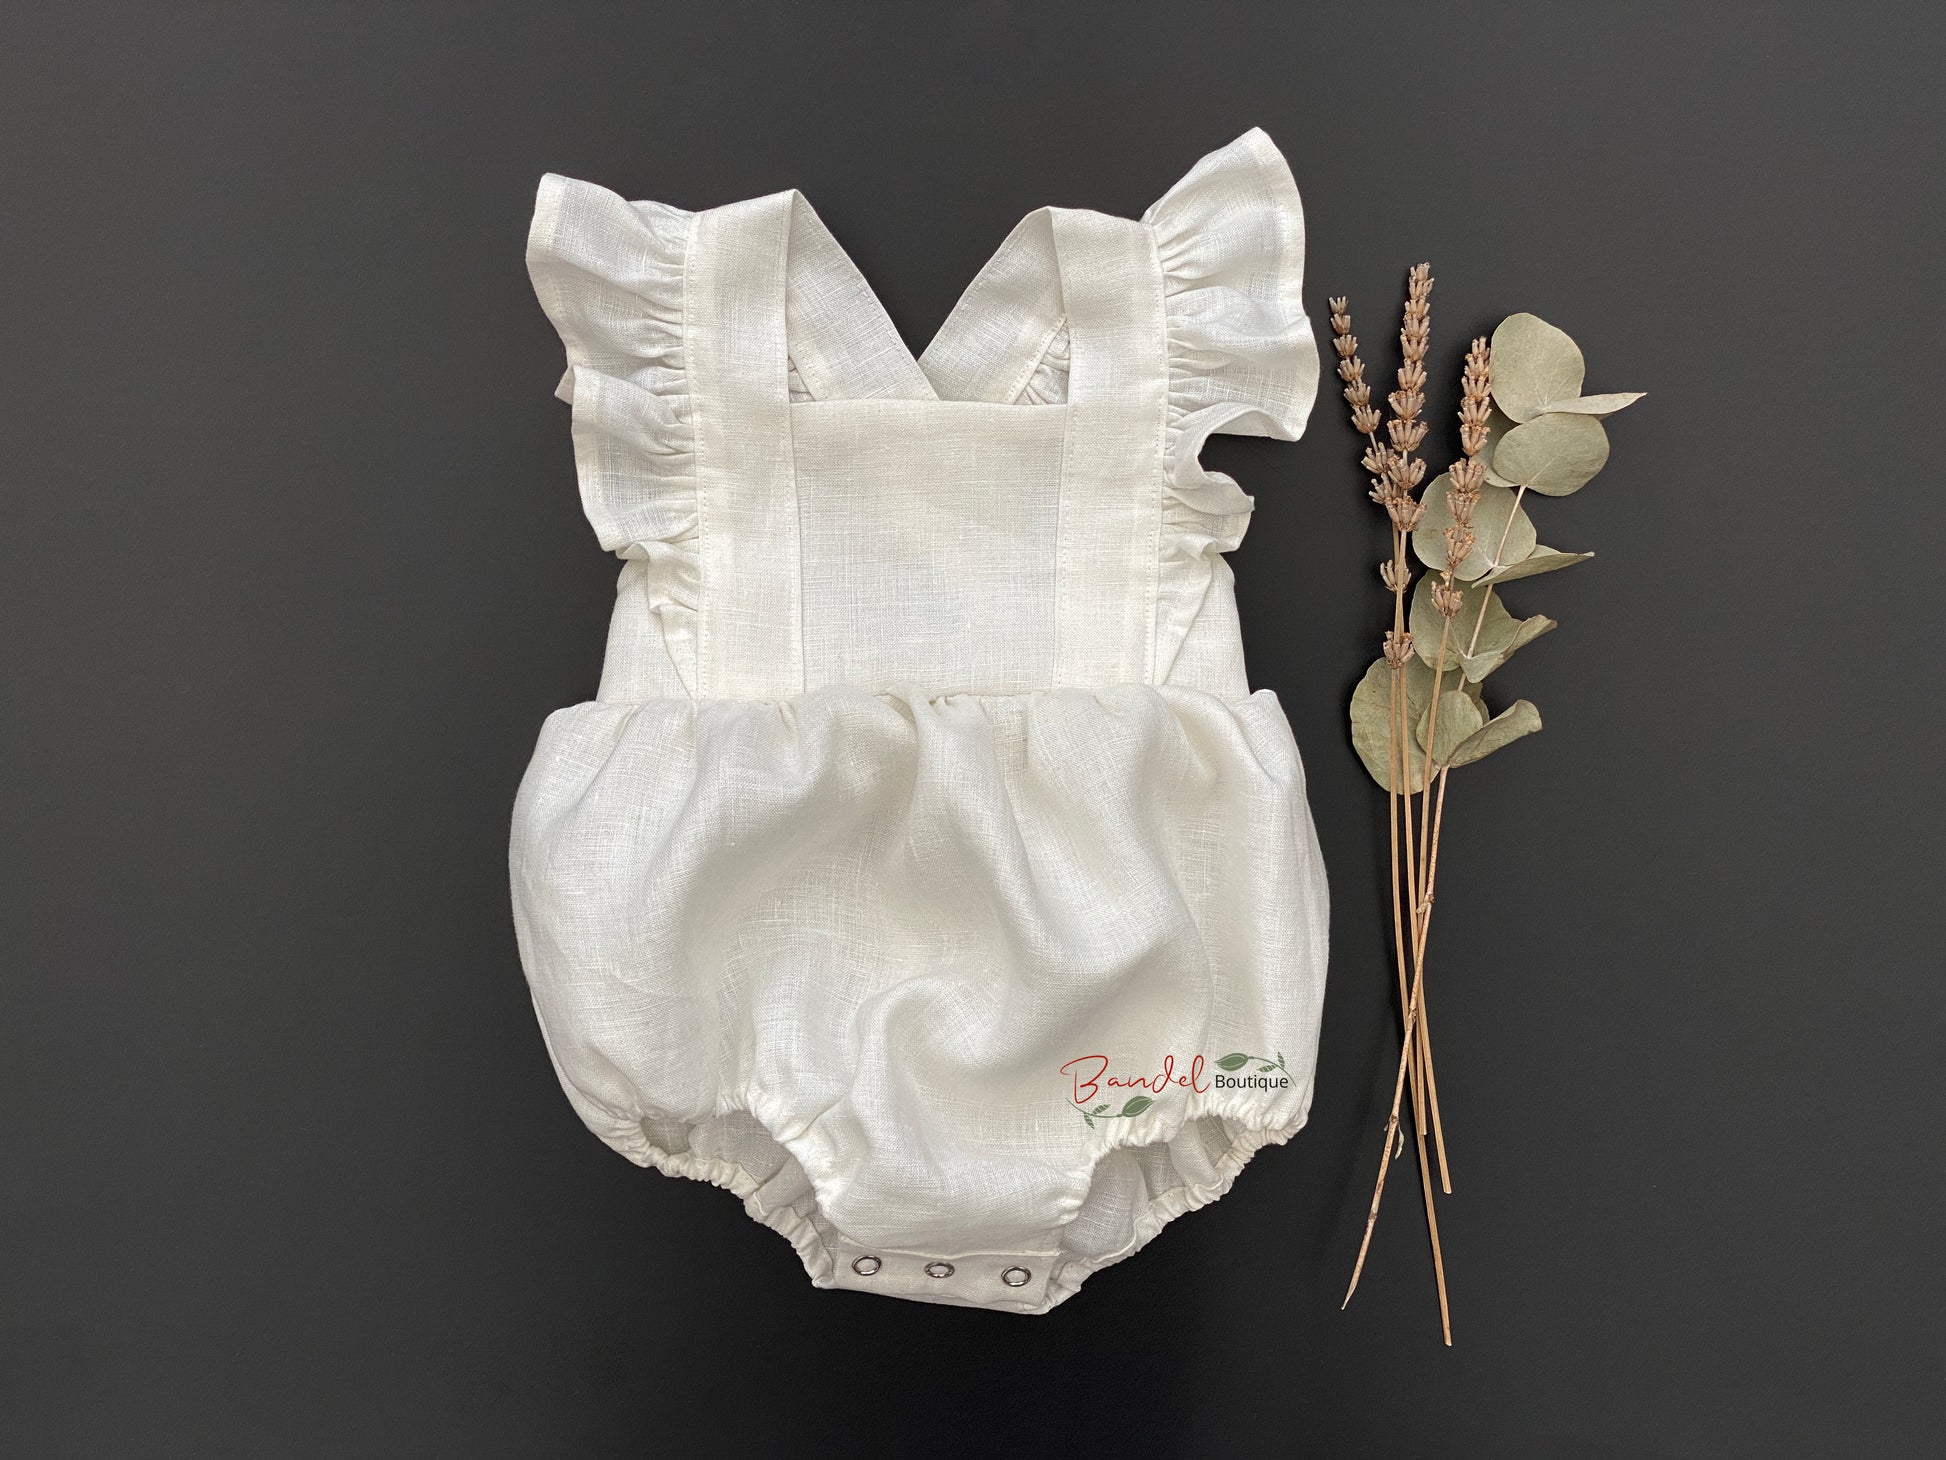 Bubble Romper-Ivory is made from 100% linen and features adjustable button straps, elastic at the leg, and snaps at the crotch for easy diaper changes. The Vintage Bubble Playsuit adds an extra special touch with its sleeve ruffles. Perfect for your little one to look fashionable and be comfortable.